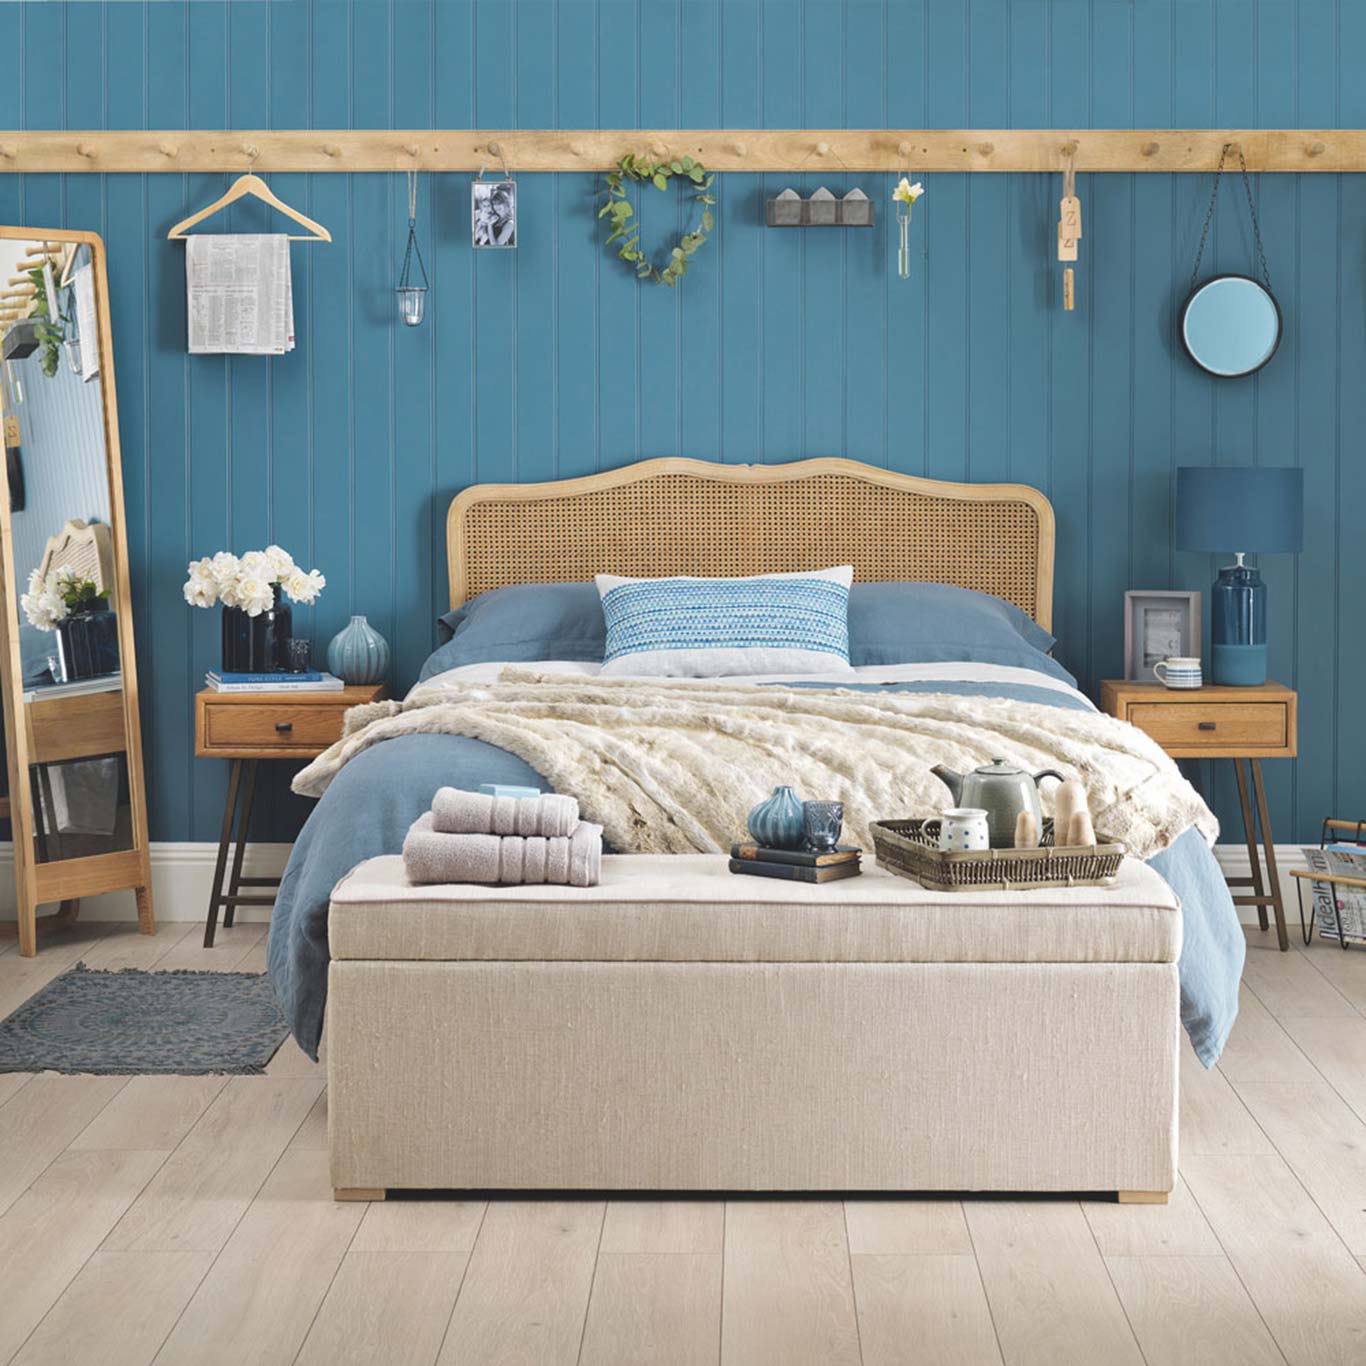 Add teal colors or beach ornaments to decorate a coastal-inspired bedroom.